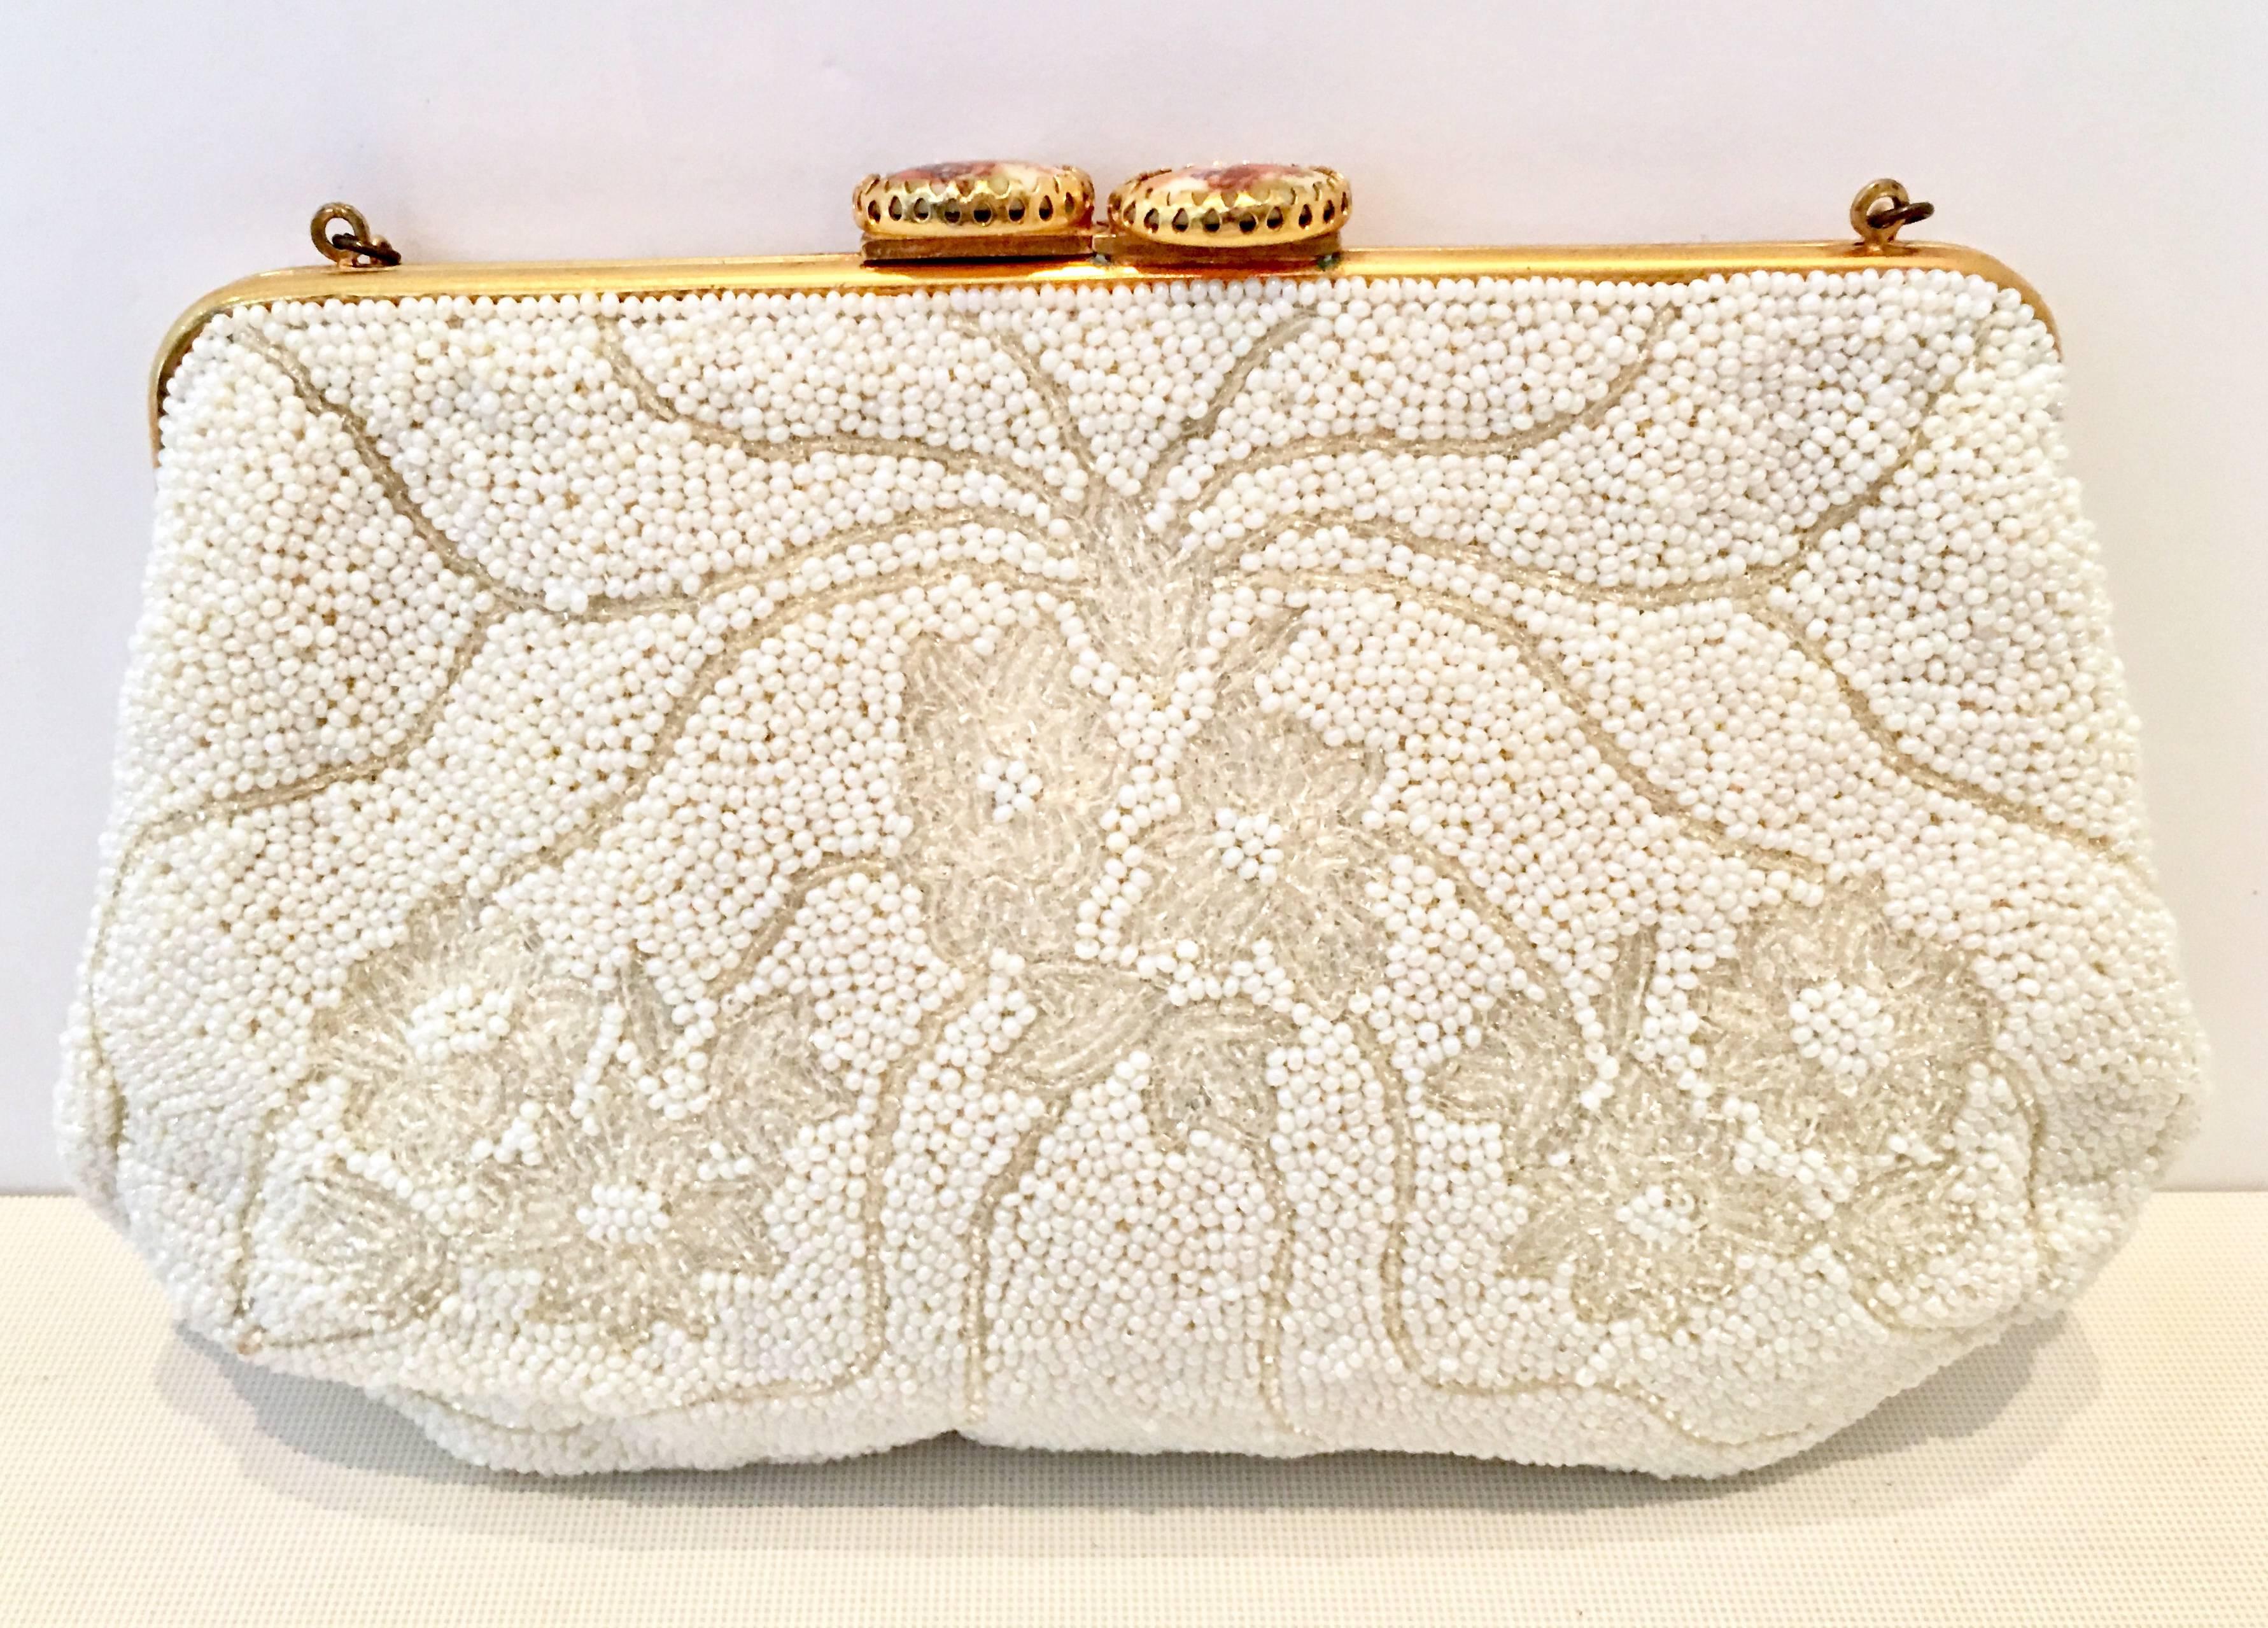 1950'S French Hand Made Art Glass Beaded, Gold Gilt & Limoges Porcelain Evening Bag By, Leo Miller. This delicate and intricate hand beaded piece features off white opaque and translucent art glass beads in a simple abstract floral motif. The frame